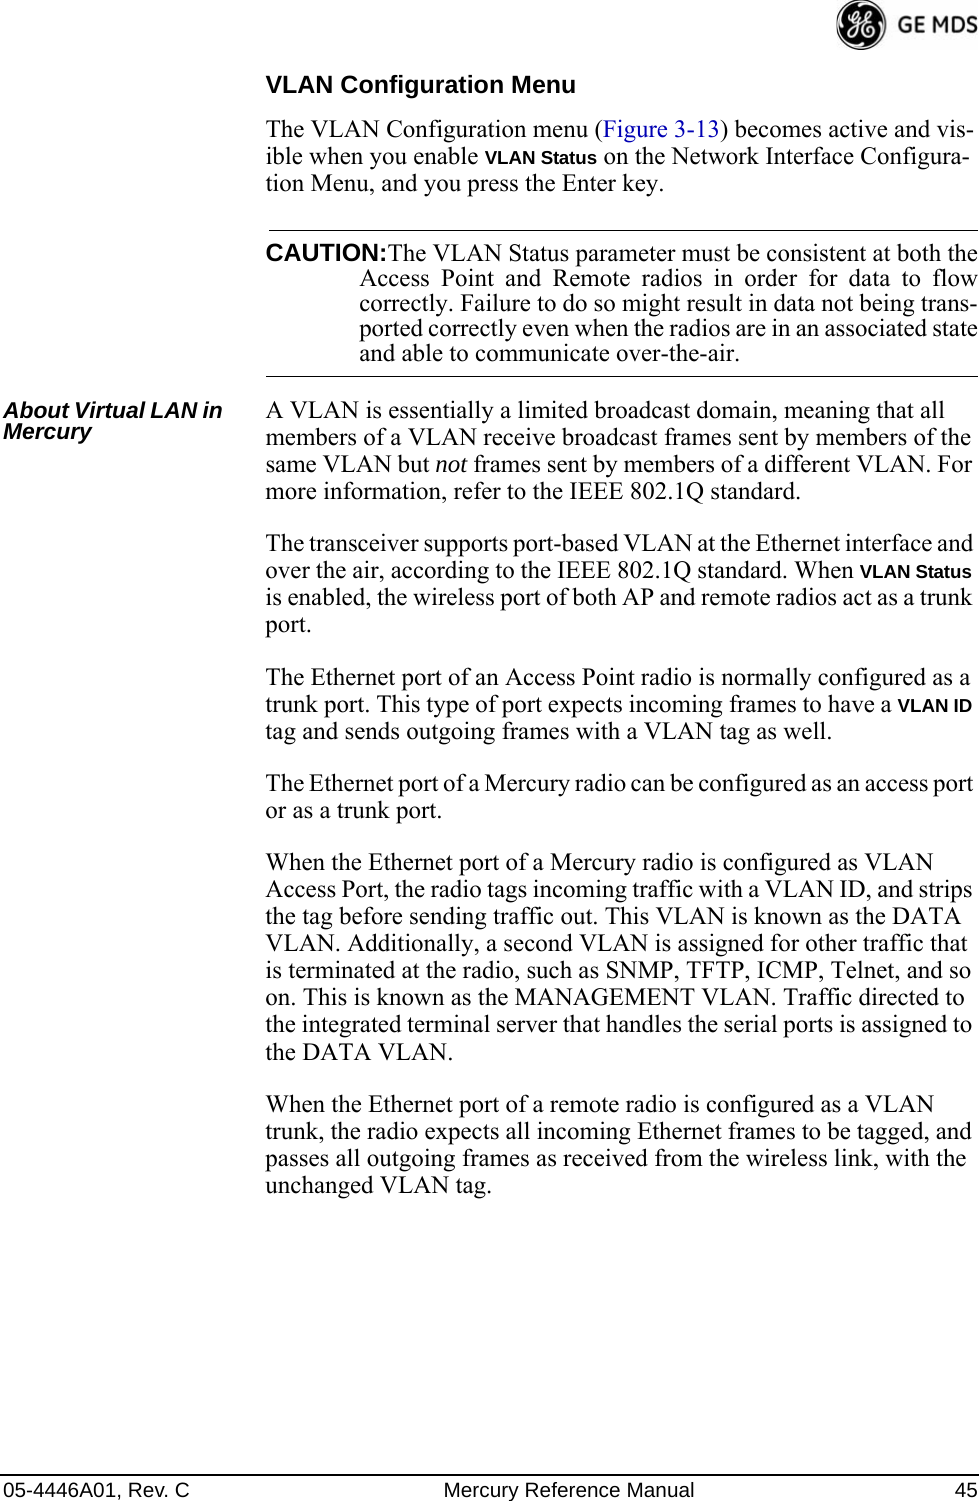 05-4446A01, Rev. C Mercury Reference Manual 45VLAN Configuration MenuThe VLAN Configuration menu (Figure 3-13) becomes active and vis-ible when you enable VLAN Status on the Network Interface Configura-tion Menu, and you press the Enter key.CAUTION:The VLAN Status parameter must be consistent at both theAccess Point and Remote radios in order for data to flowcorrectly. Failure to do so might result in data not being trans-ported correctly even when the radios are in an associated stateand able to communicate over-the-air. About Virtual LAN in Mercury A VLAN is essentially a limited broadcast domain, meaning that all members of a VLAN receive broadcast frames sent by members of the same VLAN but not frames sent by members of a different VLAN. For more information, refer to the IEEE 802.1Q standard.The transceiver supports port-based VLAN at the Ethernet interface and over the air, according to the IEEE 802.1Q standard. When VLAN Status is enabled, the wireless port of both AP and remote radios act as a trunk port. The Ethernet port of an Access Point radio is normally configured as a trunk port. This type of port expects incoming frames to have a VLAN ID tag and sends outgoing frames with a VLAN tag as well.The Ethernet port of a Mercury radio can be configured as an access port or as a trunk port. When the Ethernet port of a Mercury radio is configured as VLAN Access Port, the radio tags incoming traffic with a VLAN ID, and strips the tag before sending traffic out. This VLAN is known as the DATA VLAN. Additionally, a second VLAN is assigned for other traffic that is terminated at the radio, such as SNMP, TFTP, ICMP, Telnet, and so on. This is known as the MANAGEMENT VLAN. Traffic directed to the integrated terminal server that handles the serial ports is assigned to the DATA VLAN.When the Ethernet port of a remote radio is configured as a VLAN trunk, the radio expects all incoming Ethernet frames to be tagged, and passes all outgoing frames as received from the wireless link, with the unchanged VLAN tag.